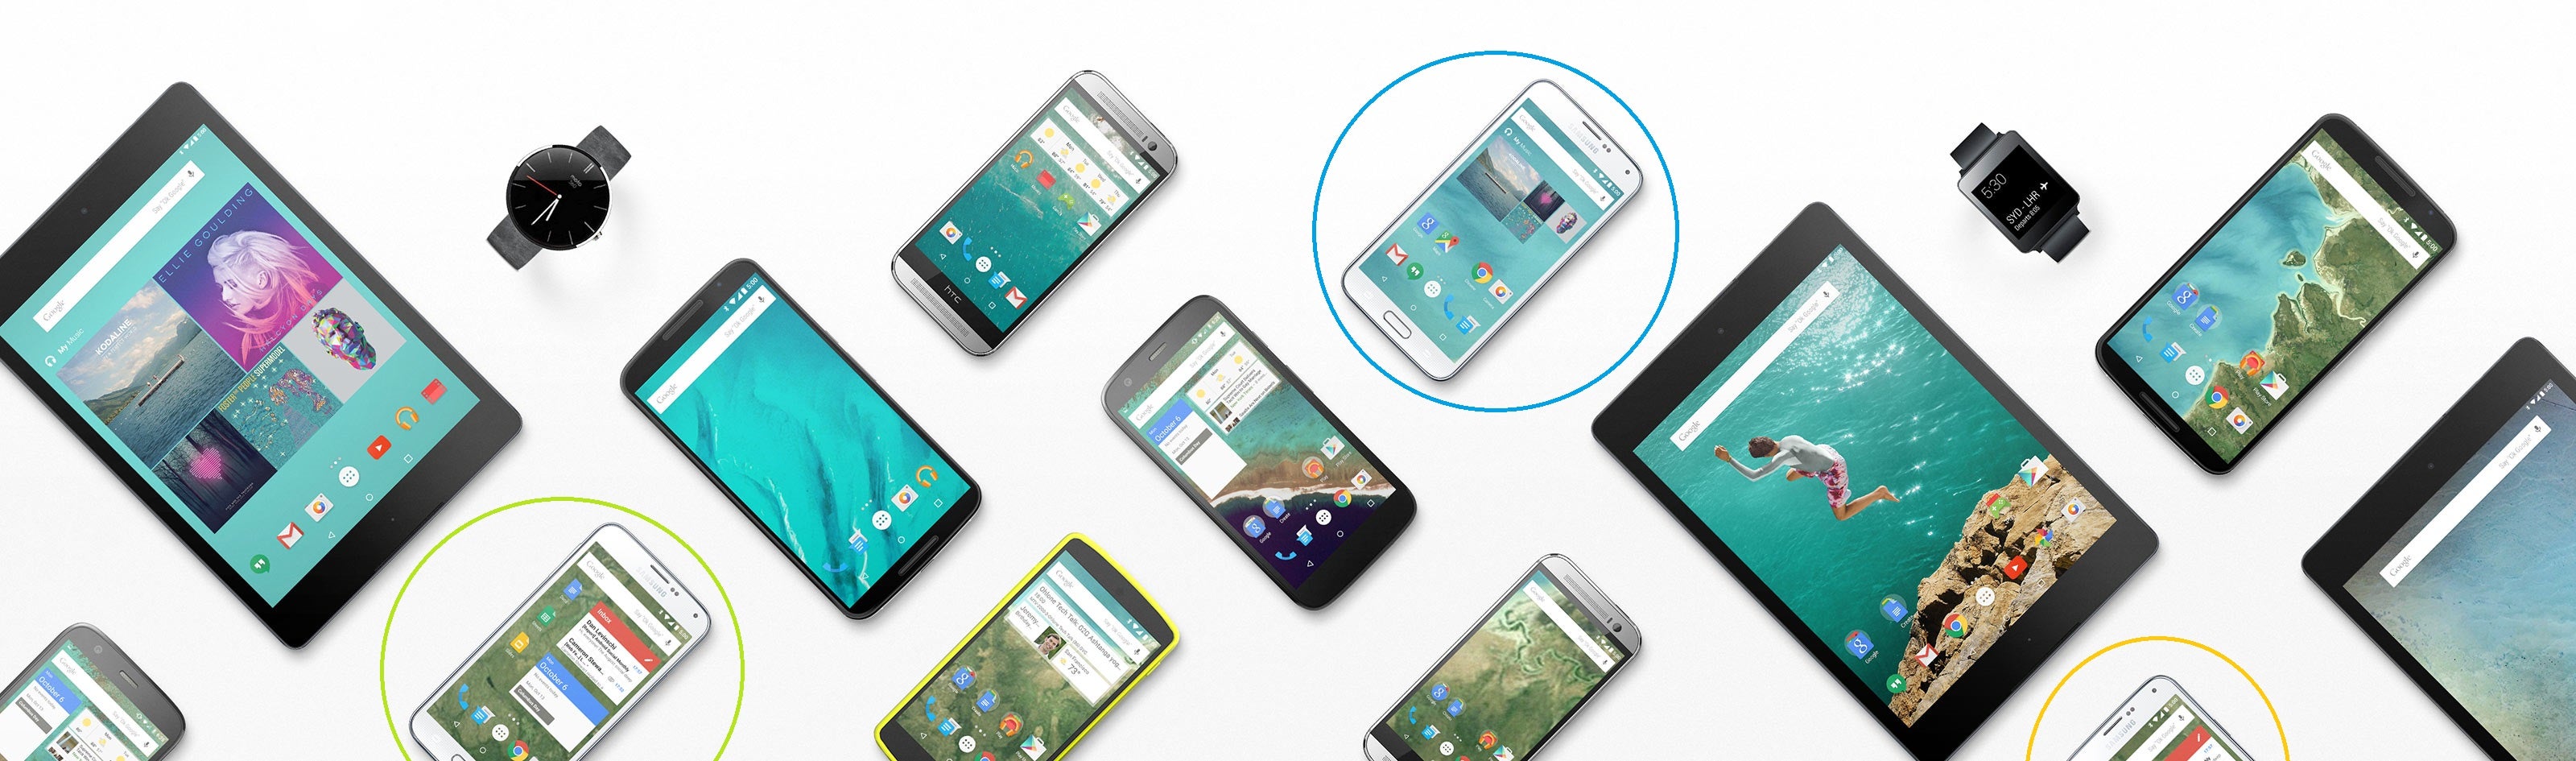 Google Play edition Samsung Galaxy S5 accidentally outed by Google?